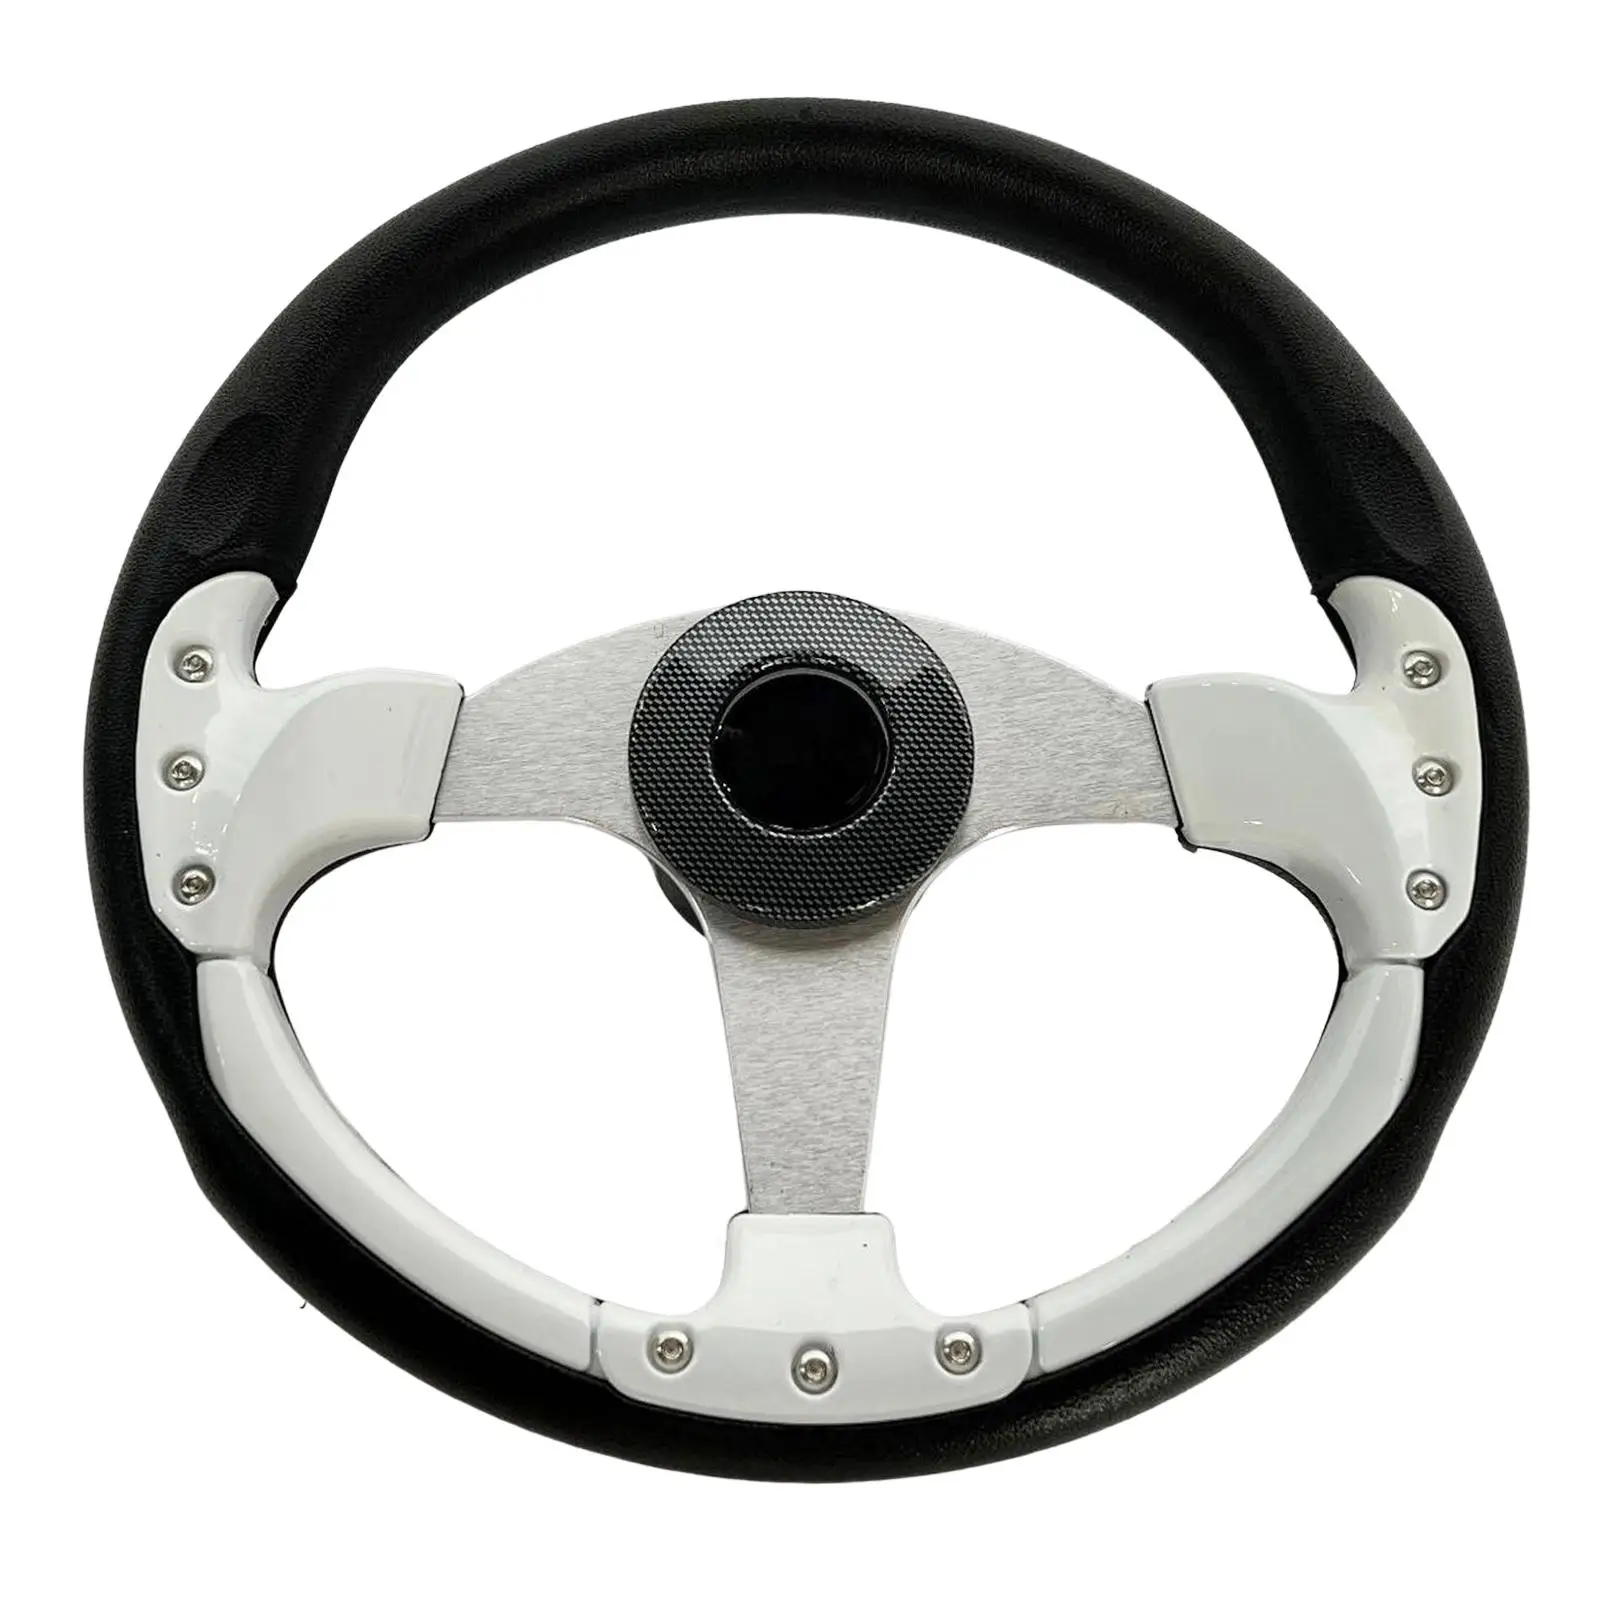 3 Spokes 13.8 inch Boat Steering Wheel 3/4 Tapered Shaft for Marine Boats